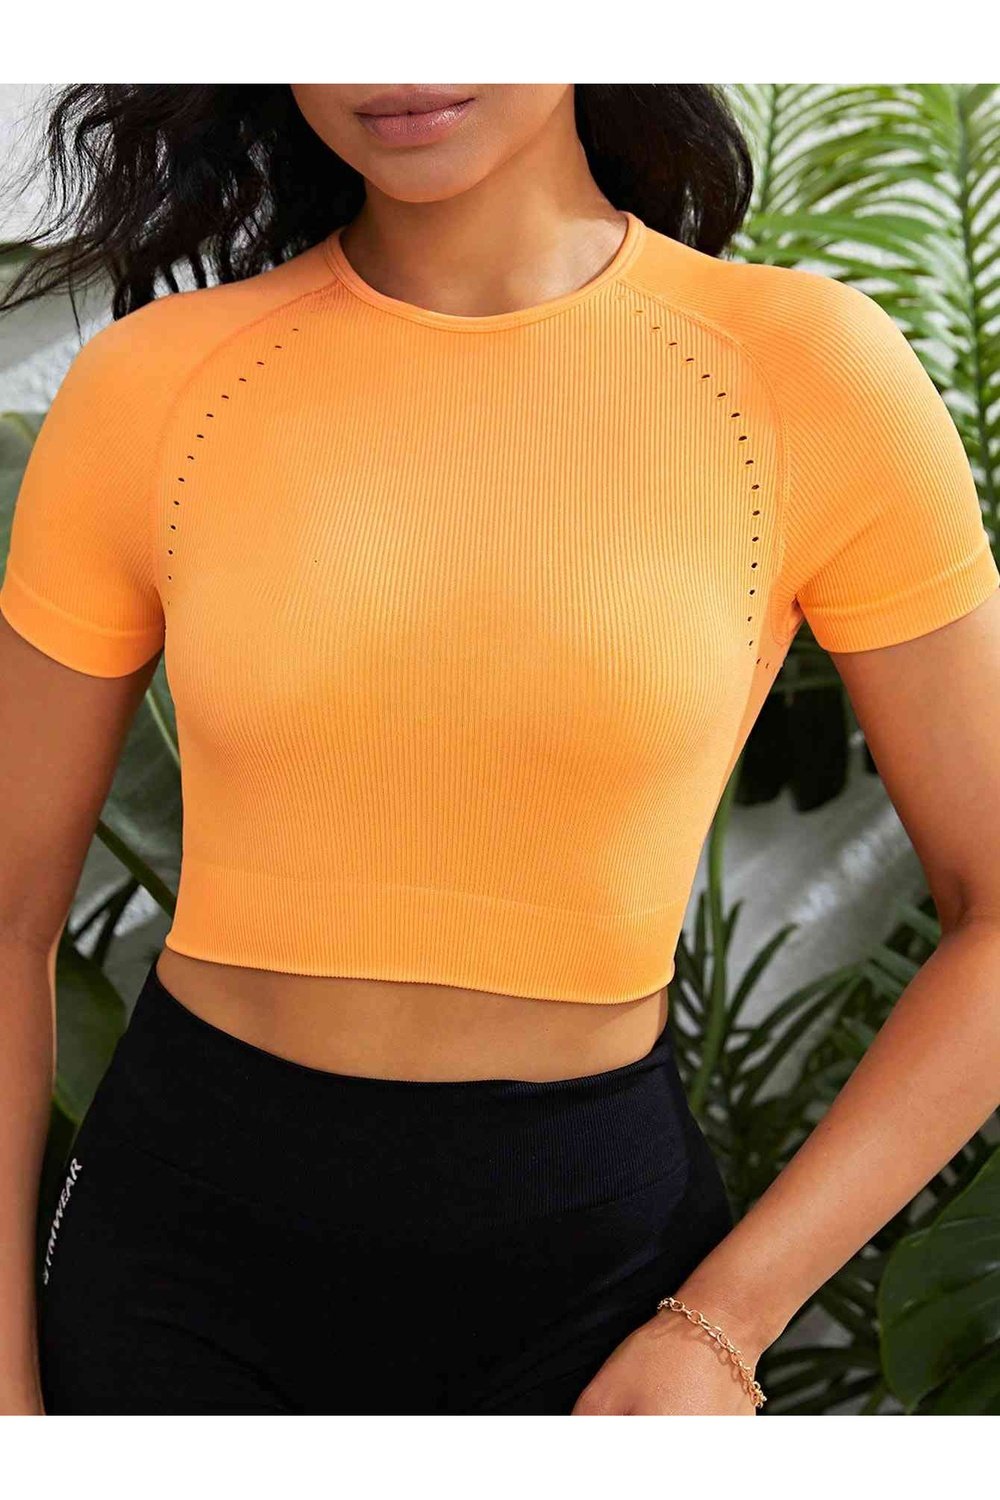 Cropped Round Neck Active Top - Crop Tops & Tank Tops - FITGGINS